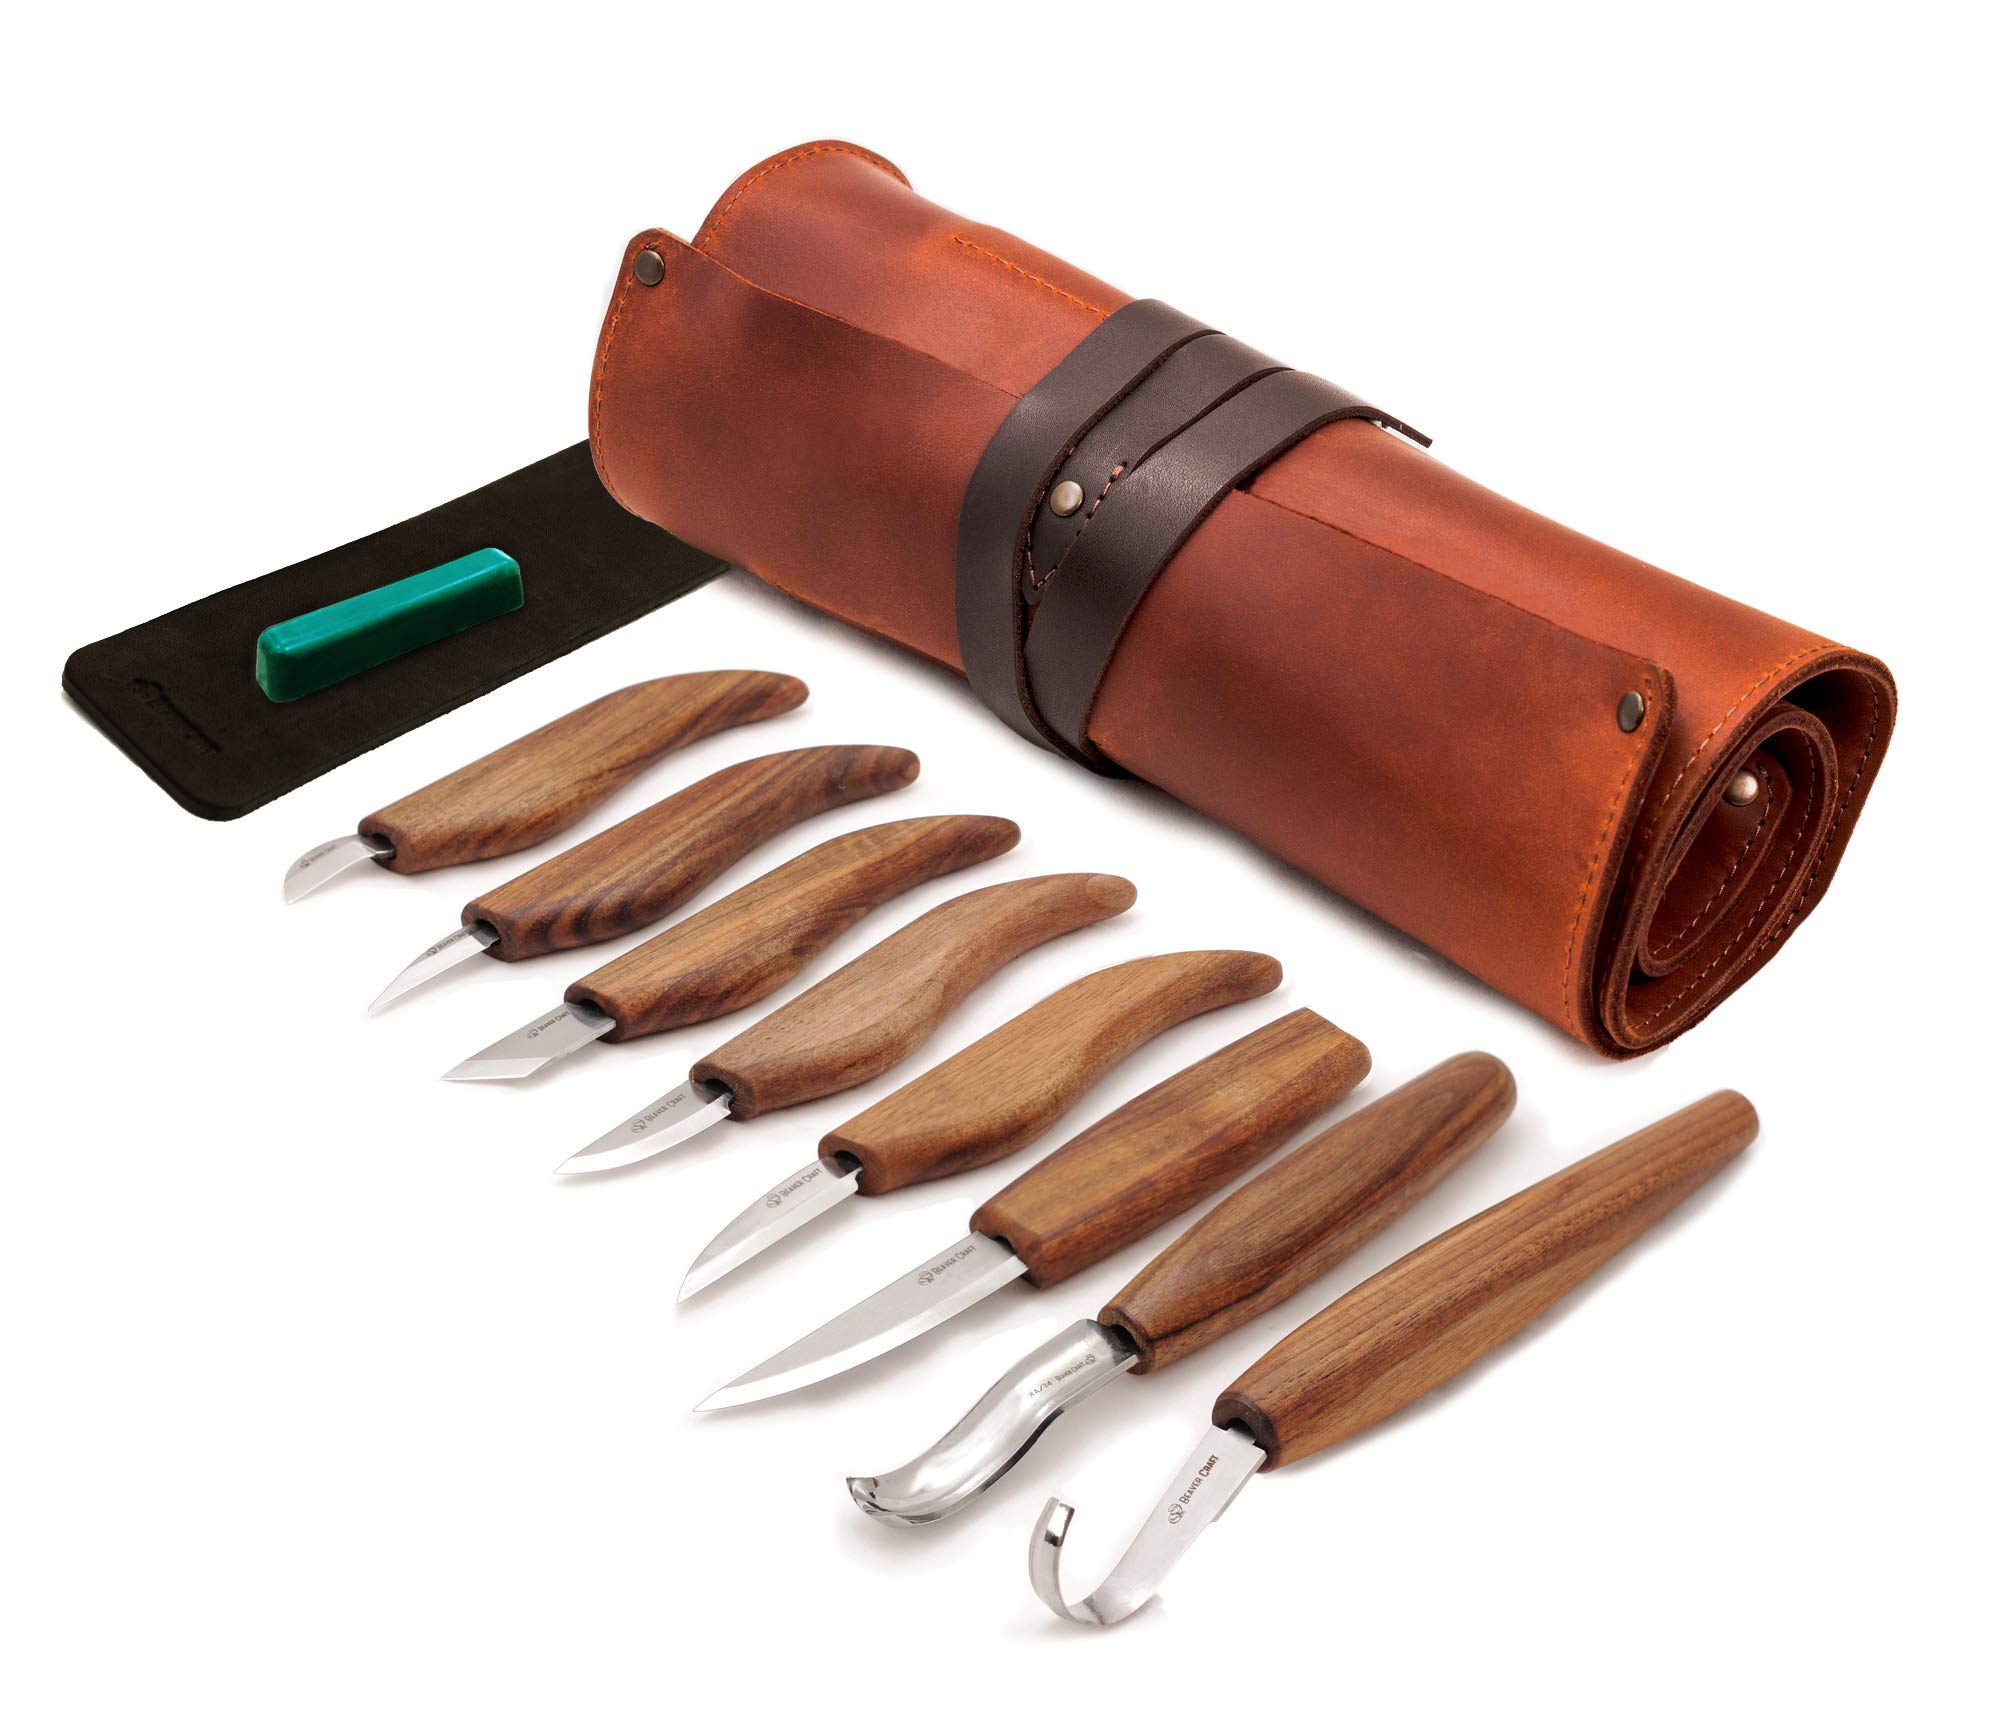 Wood Carving Set With Men's Thimbles, Wood Carving Set, Wood Carving Knives.  Knives for Carving Wood. Wood Carving Tools Wood Carving Knife 